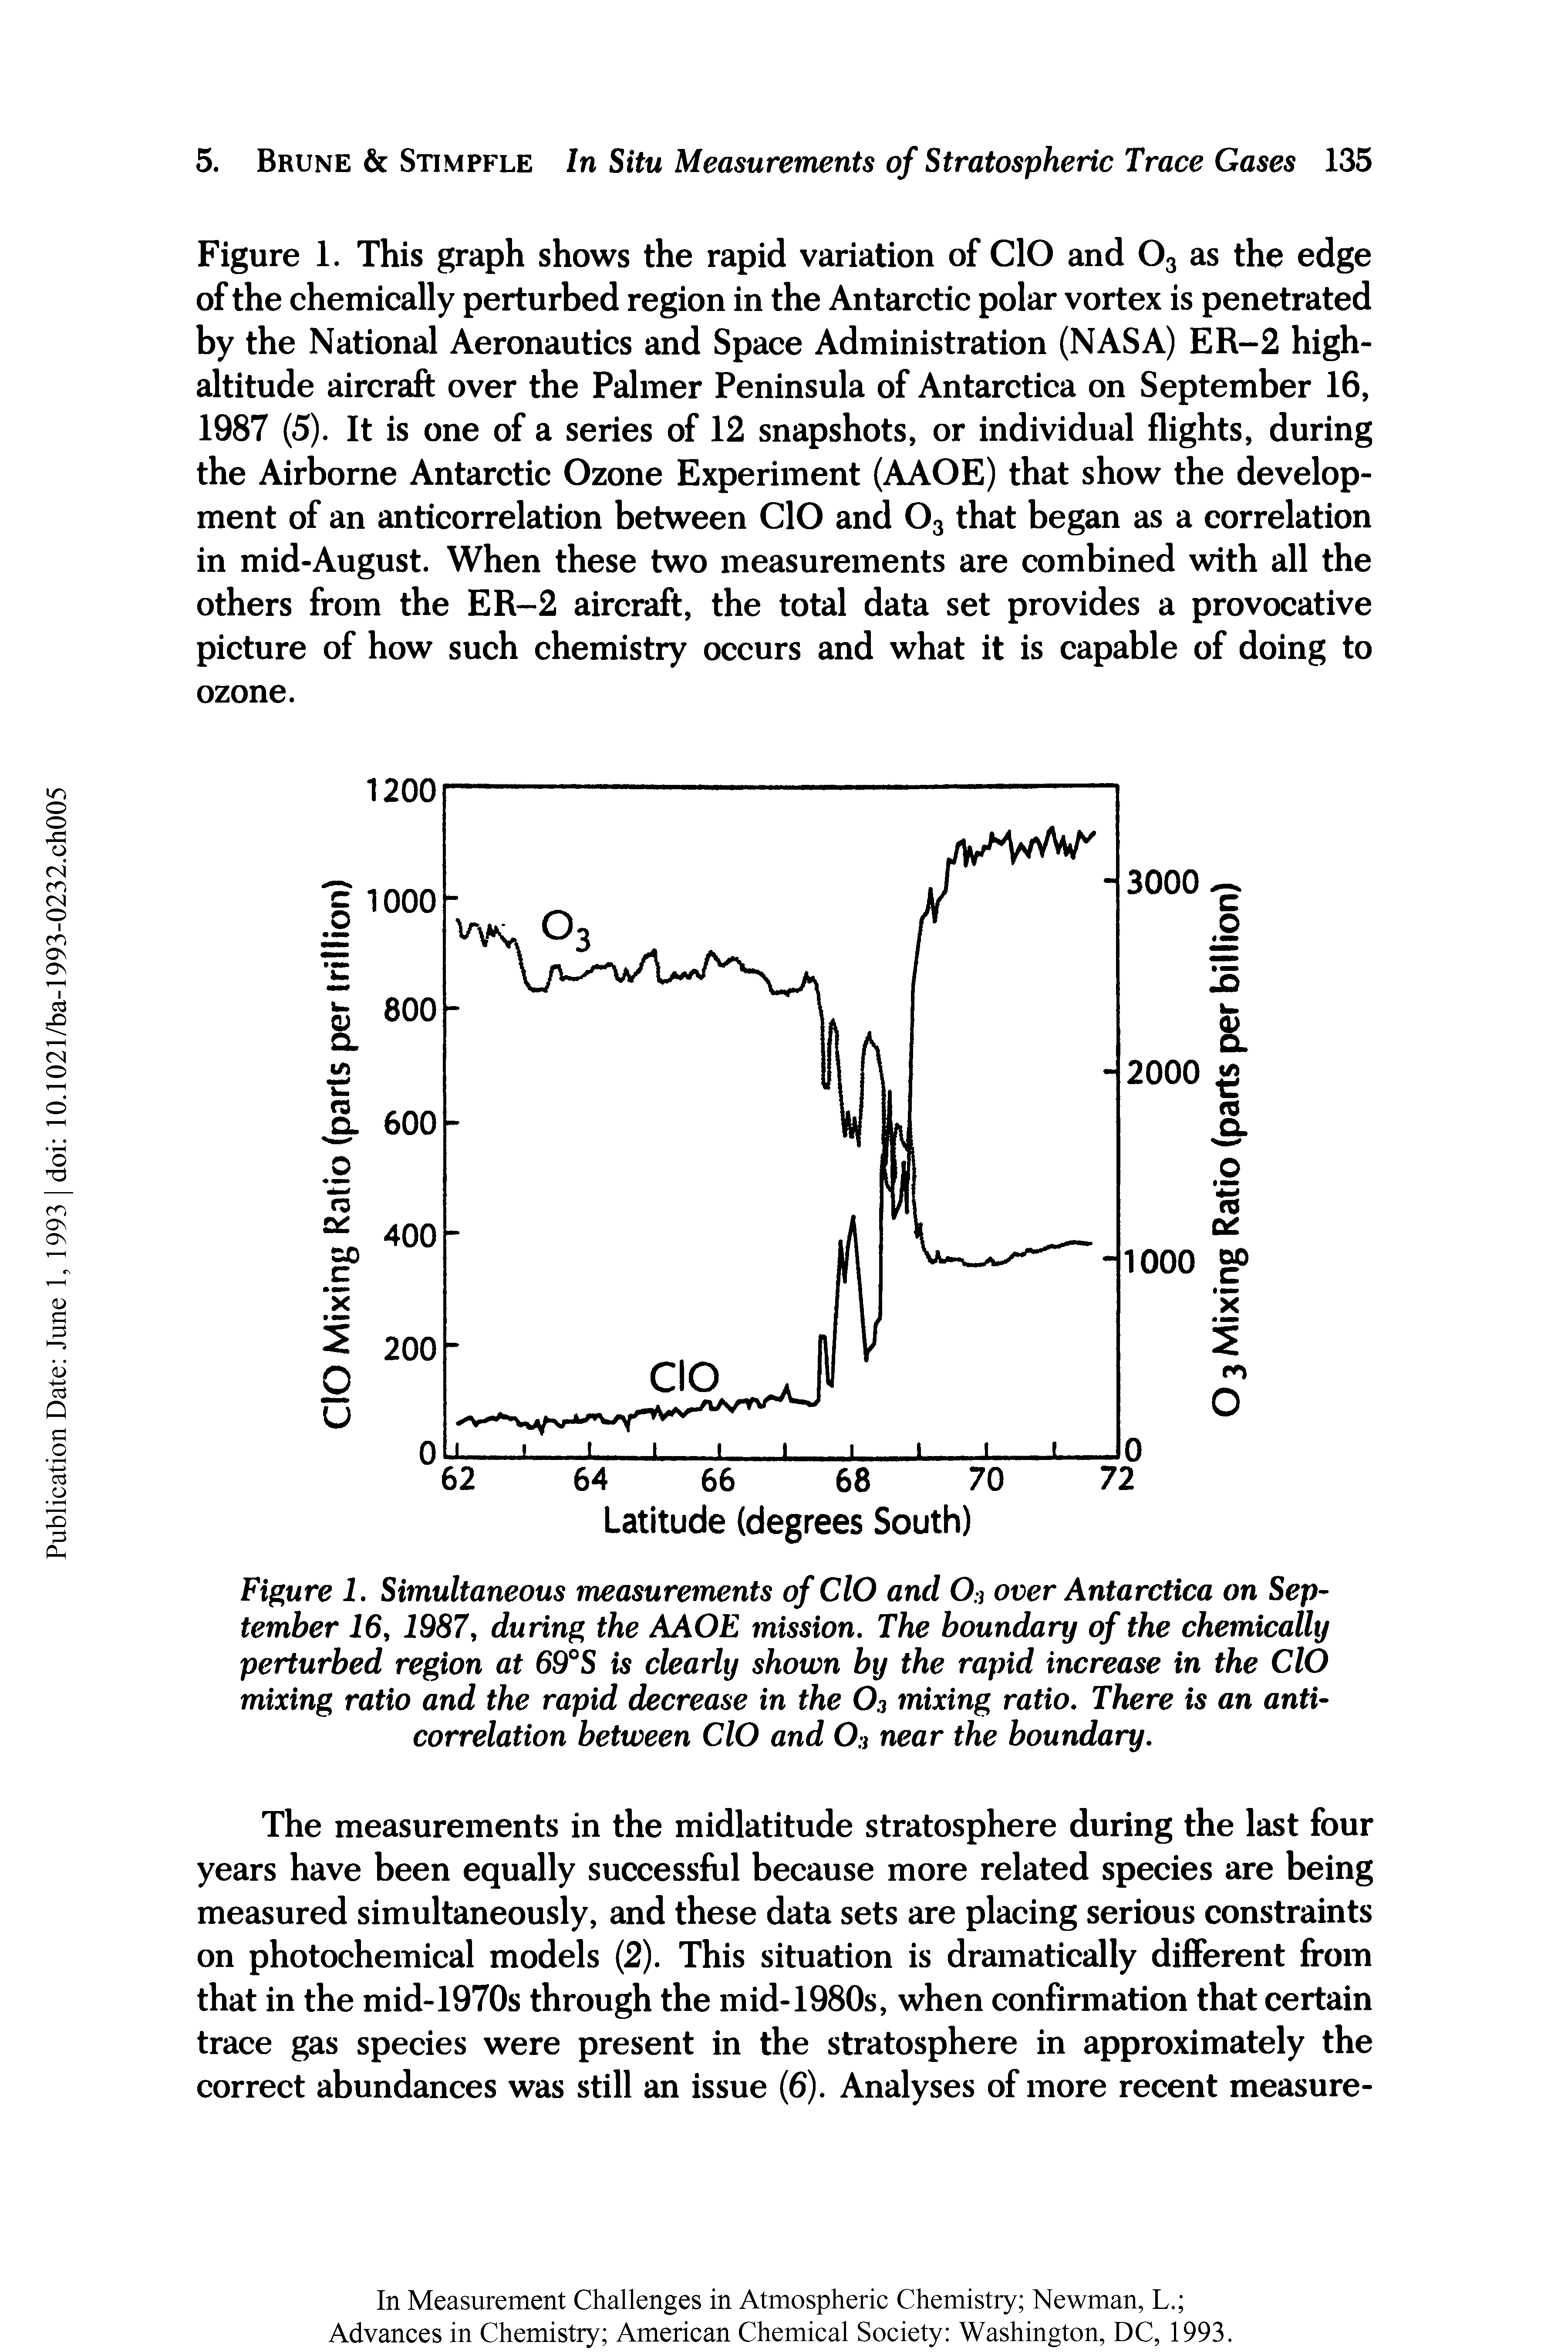 Figure 1. Simultaneous measurements of CIO and 0 i over Antarctica on September 16, 1987, during the AAOE mission. The boundary of the chemically perturbed region at 69°S is clearly shown by the rapid increase in the CIO mixing ratio and the rapid decrease in the 03 mixing ratio. There is an anticorrelation between CIO and 03 near the boundary.